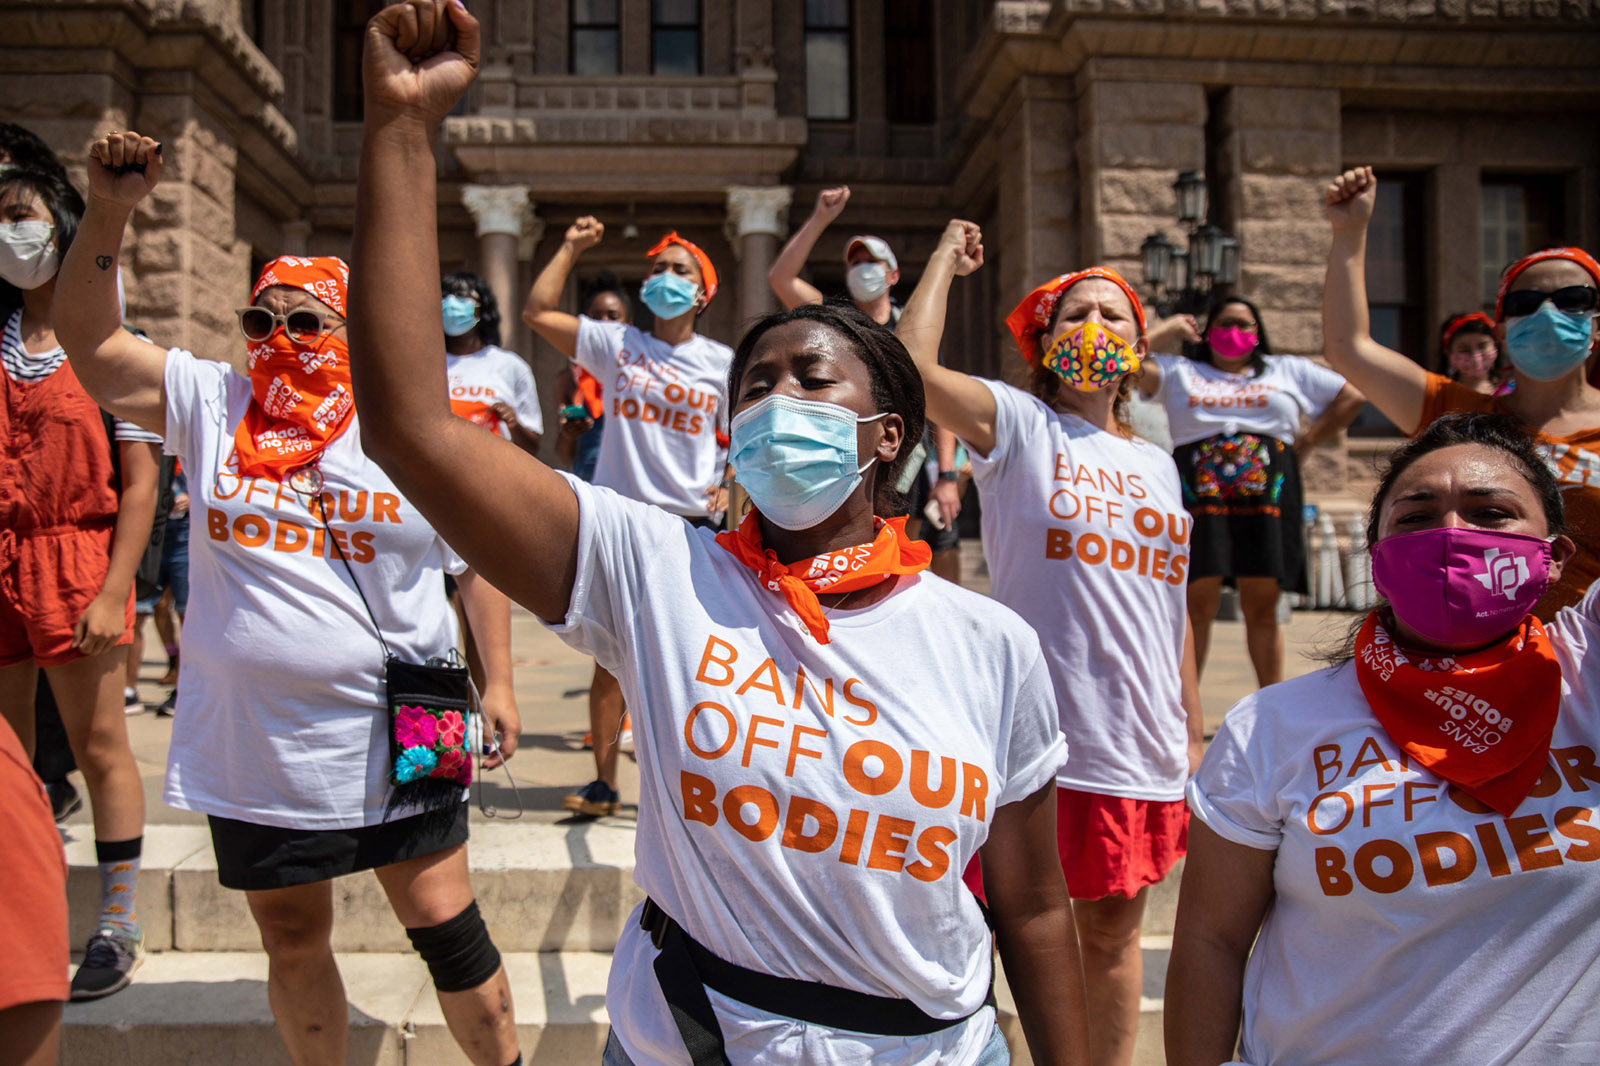 A protest at the Texas State Capitol against a new law banning abortion after six weeks of pregnancy